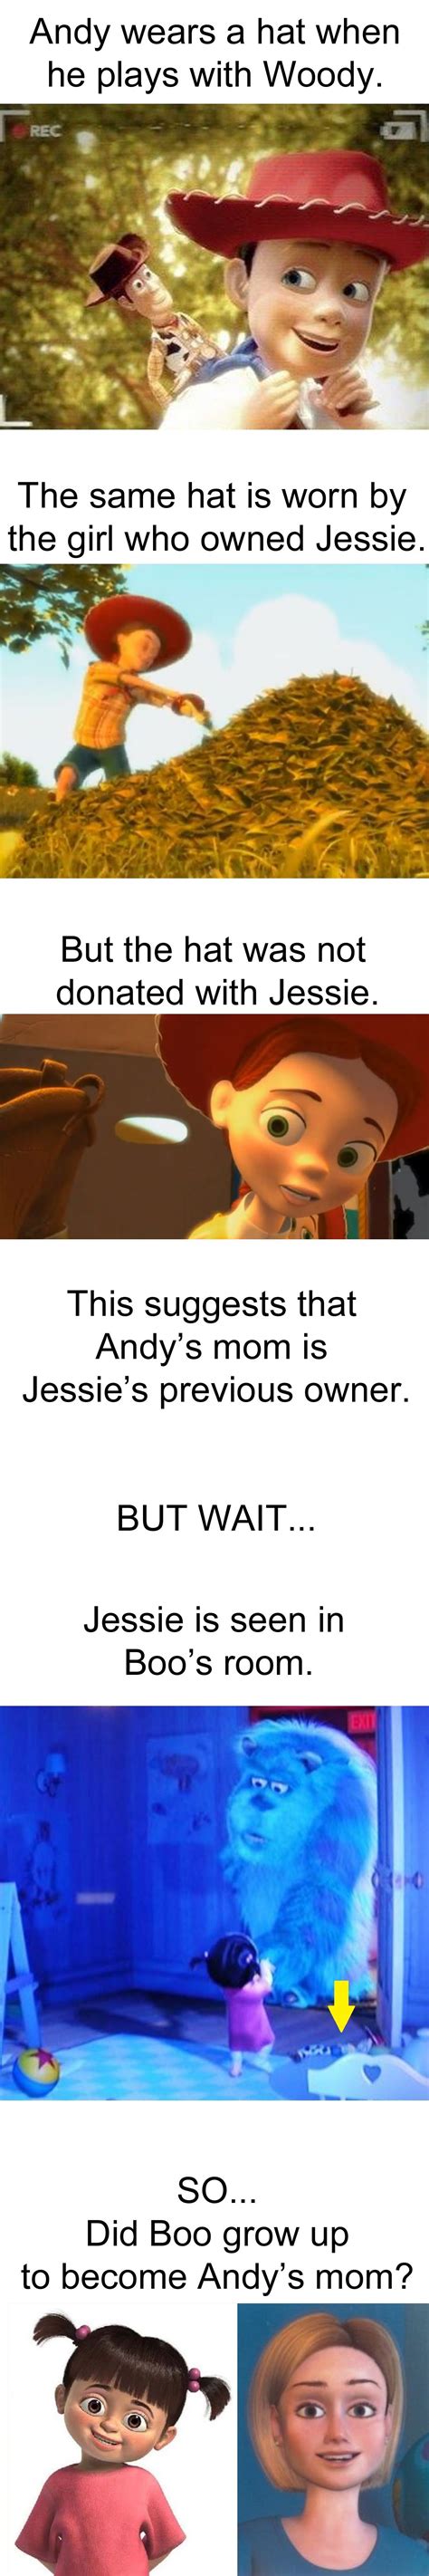 Did Boo From Monsters Inc Grow Up To Become Andys Mom In Toy Story